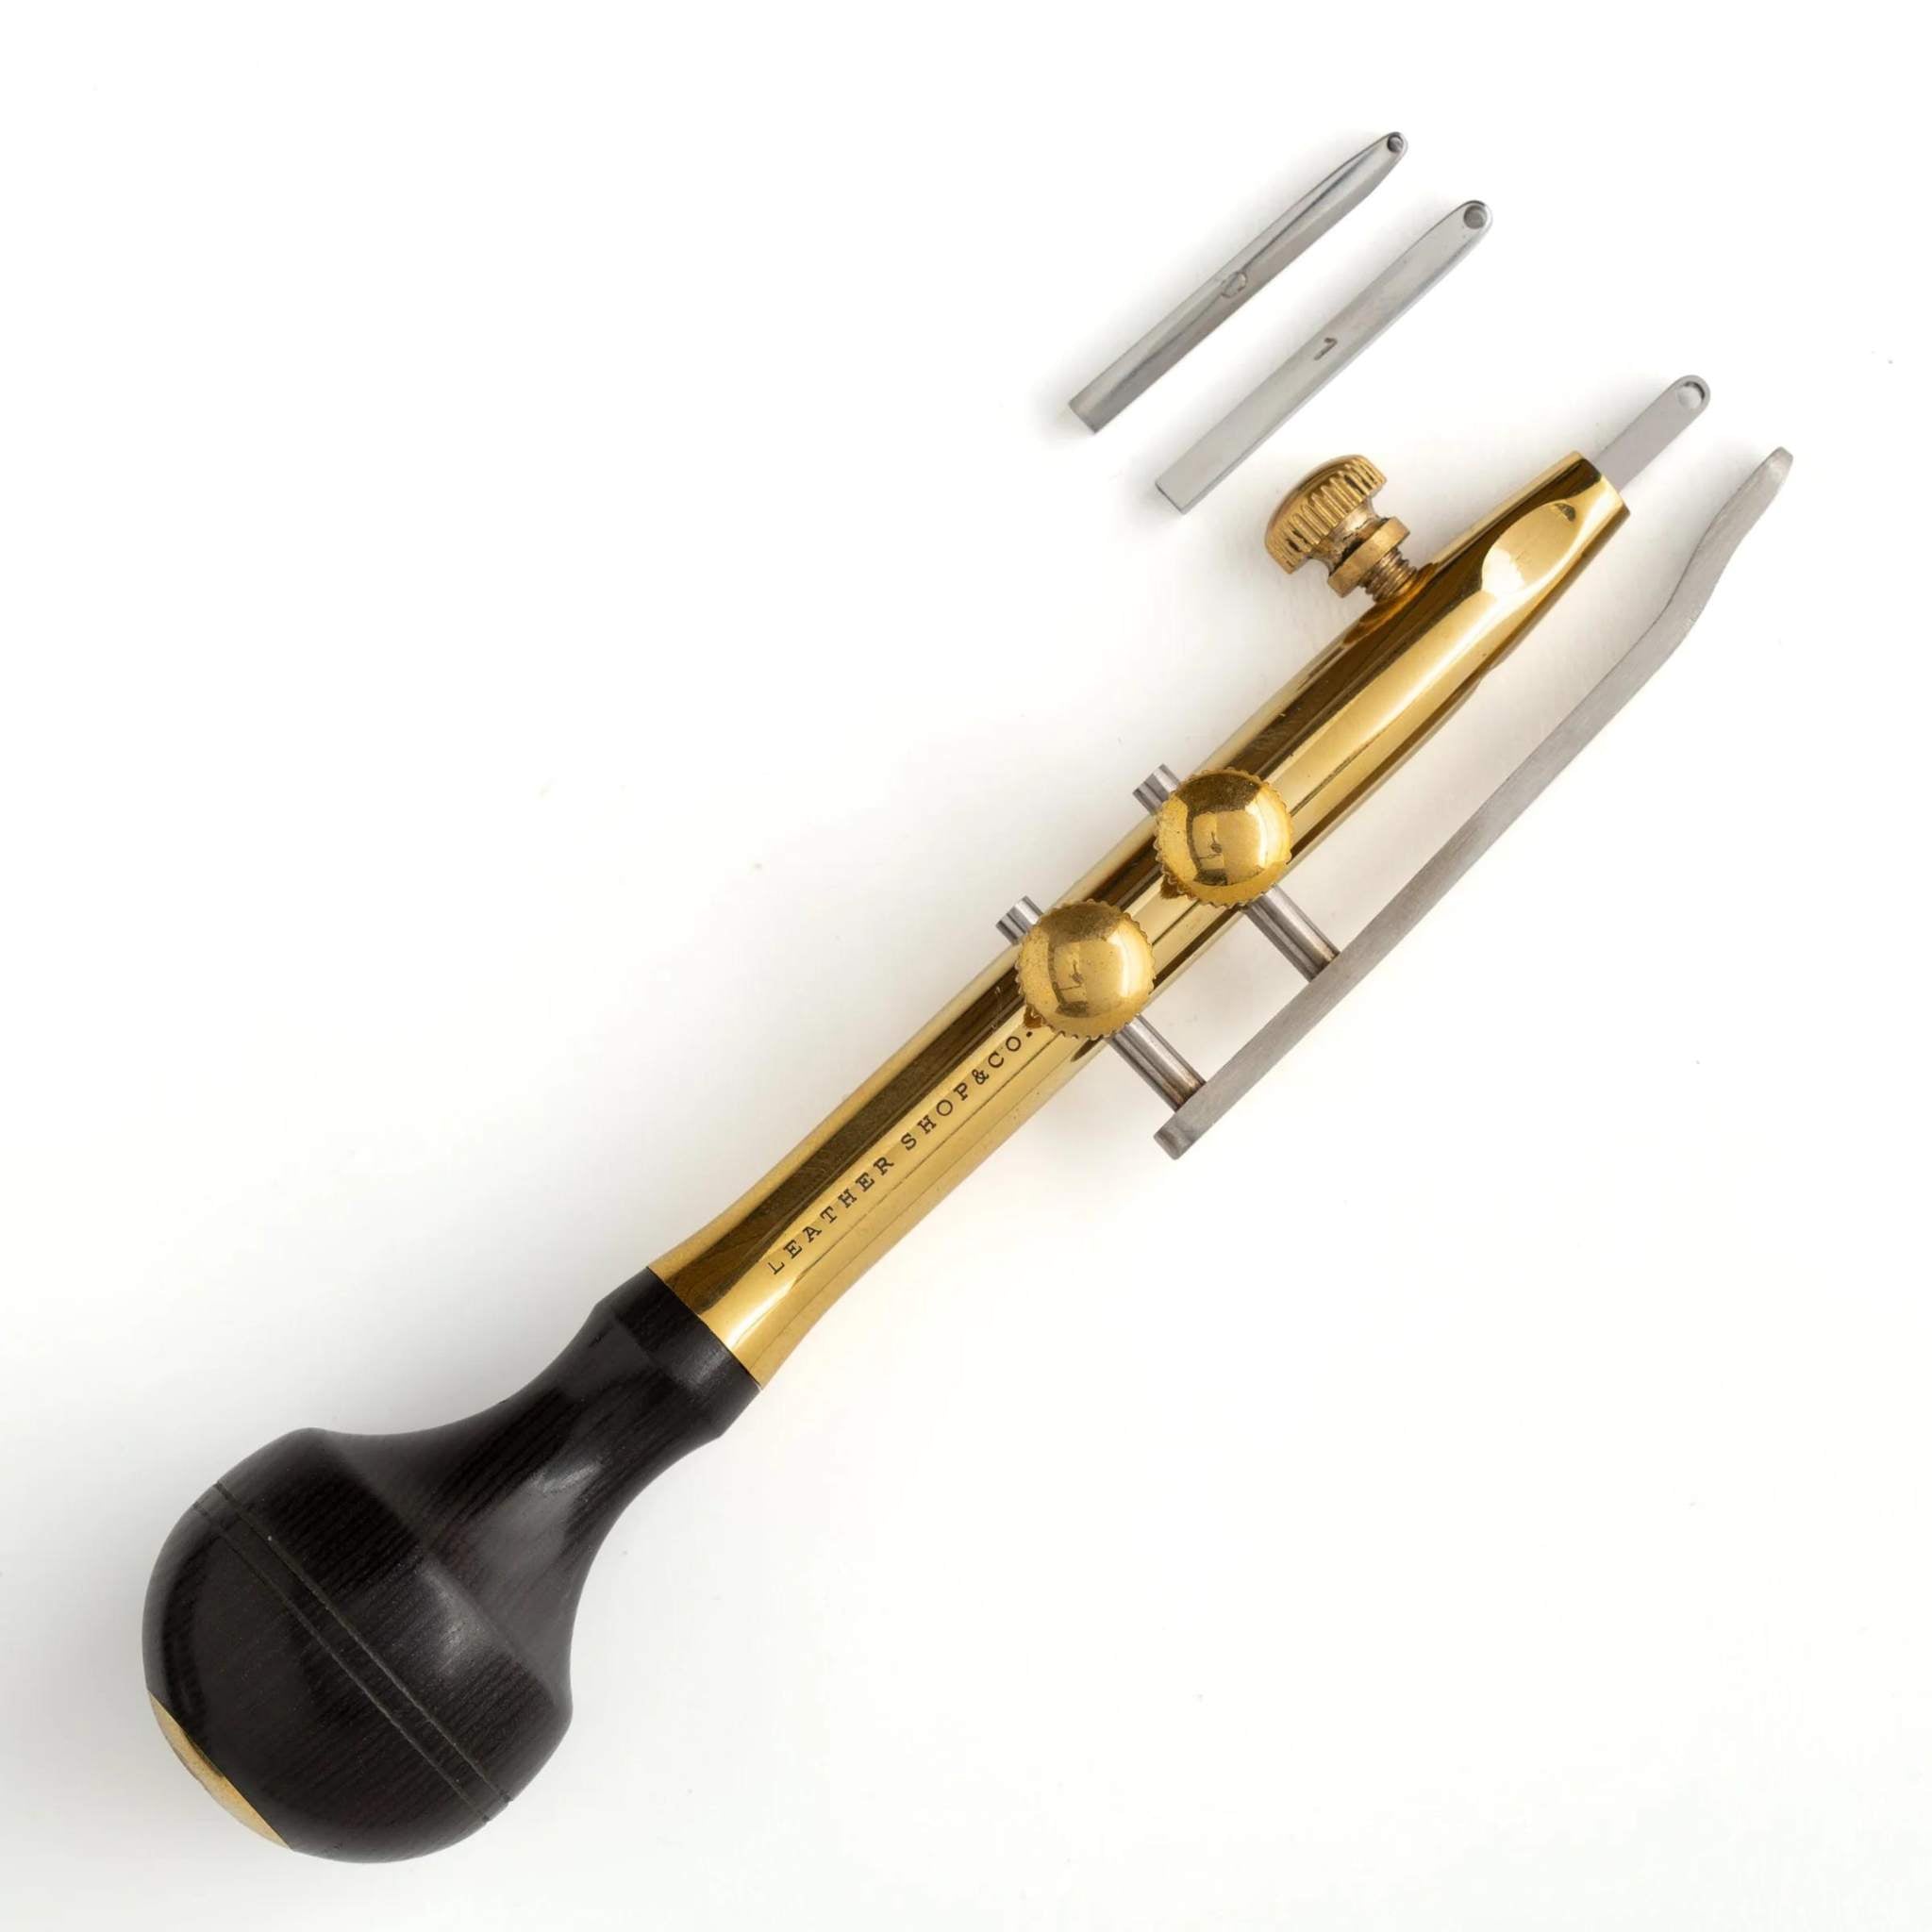 Beautifully made from quality materials - this TandyPro stitching groover is a truly wonderful tool for leathercrafters. Making well defined stitch groove channel for stitches to sit neatly in.